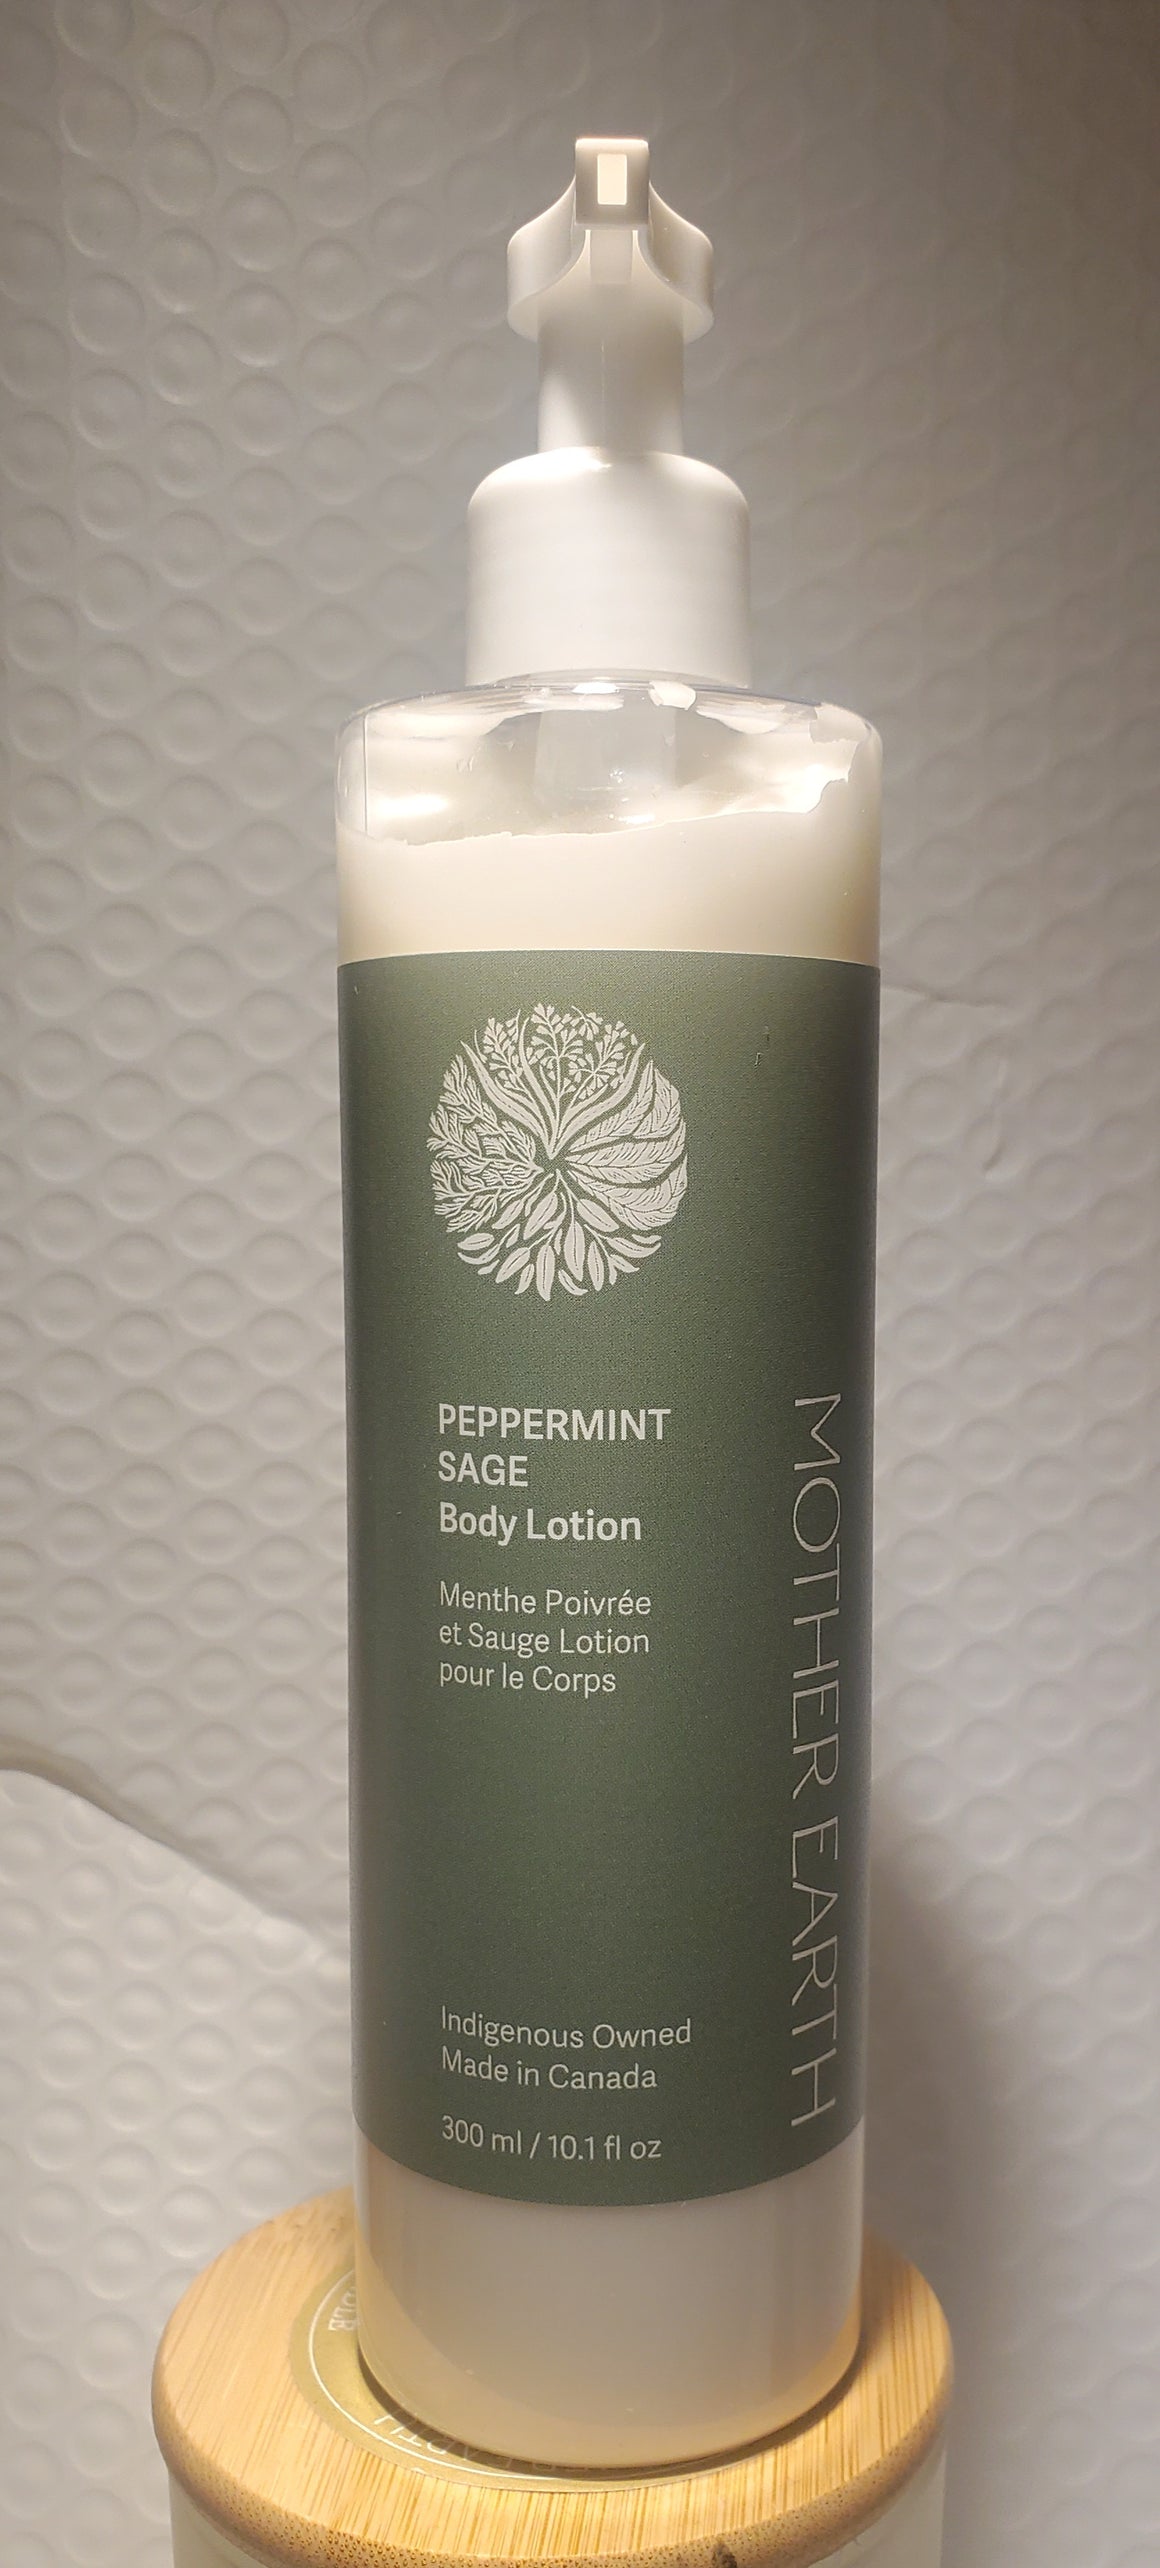 Peppermint Sage Body Lotion